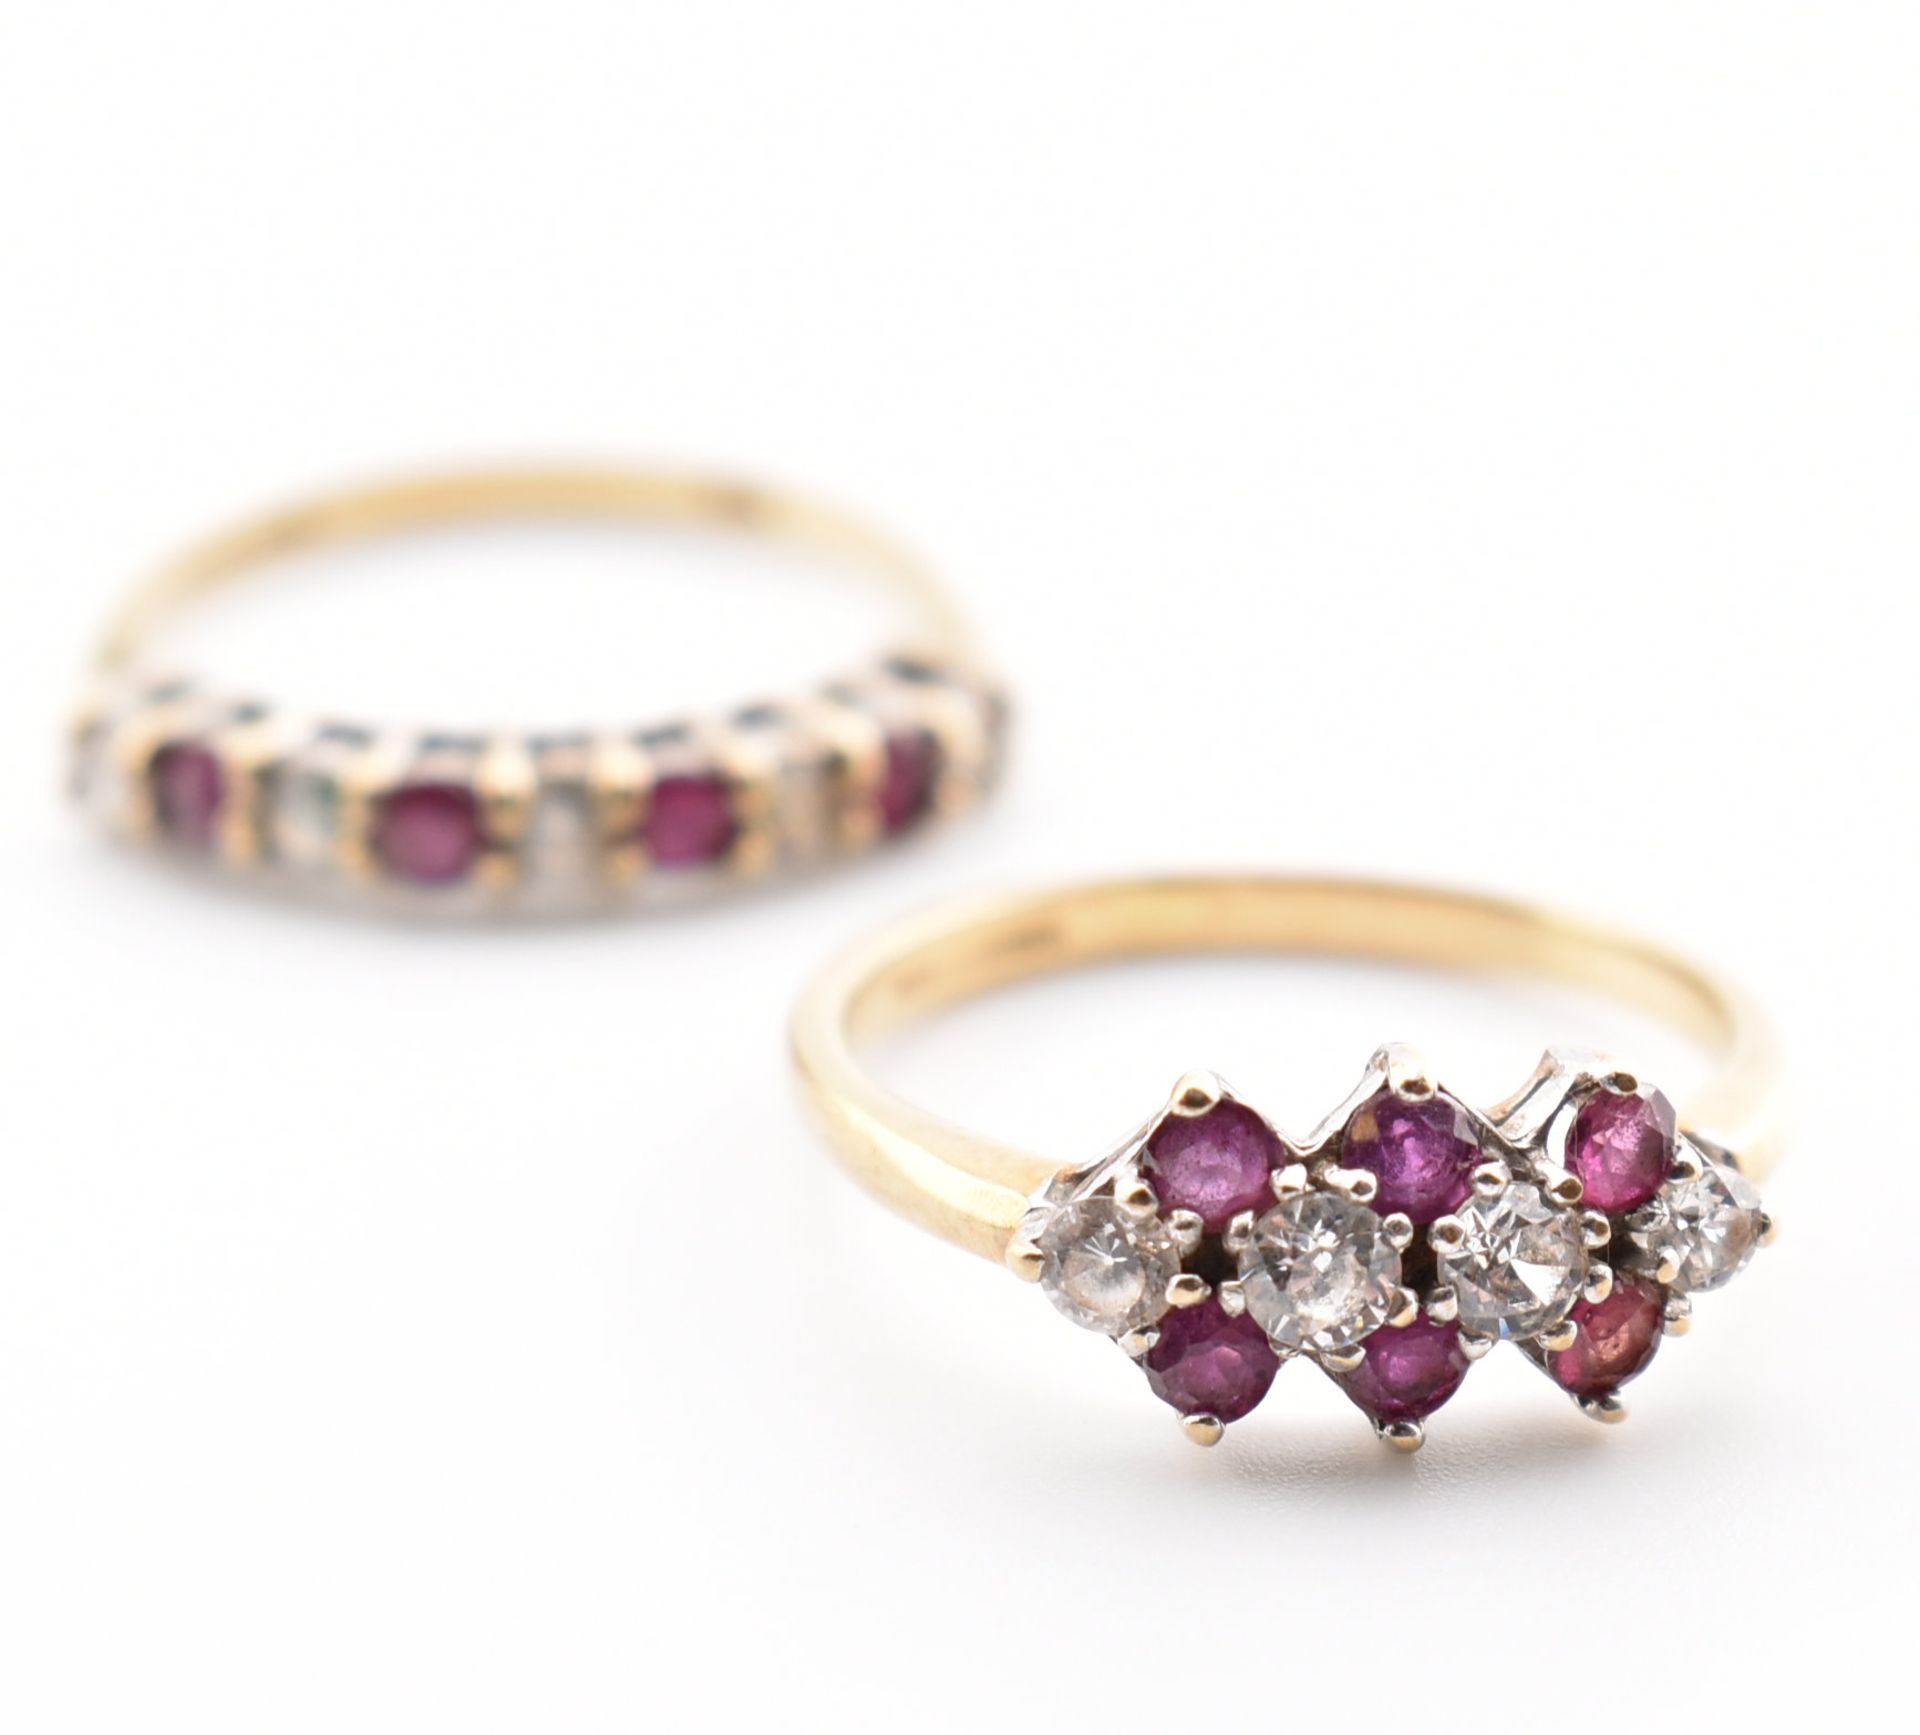 TWO HALLMARKED 9CT GOLD RUBY & WHITE STONE RINGS